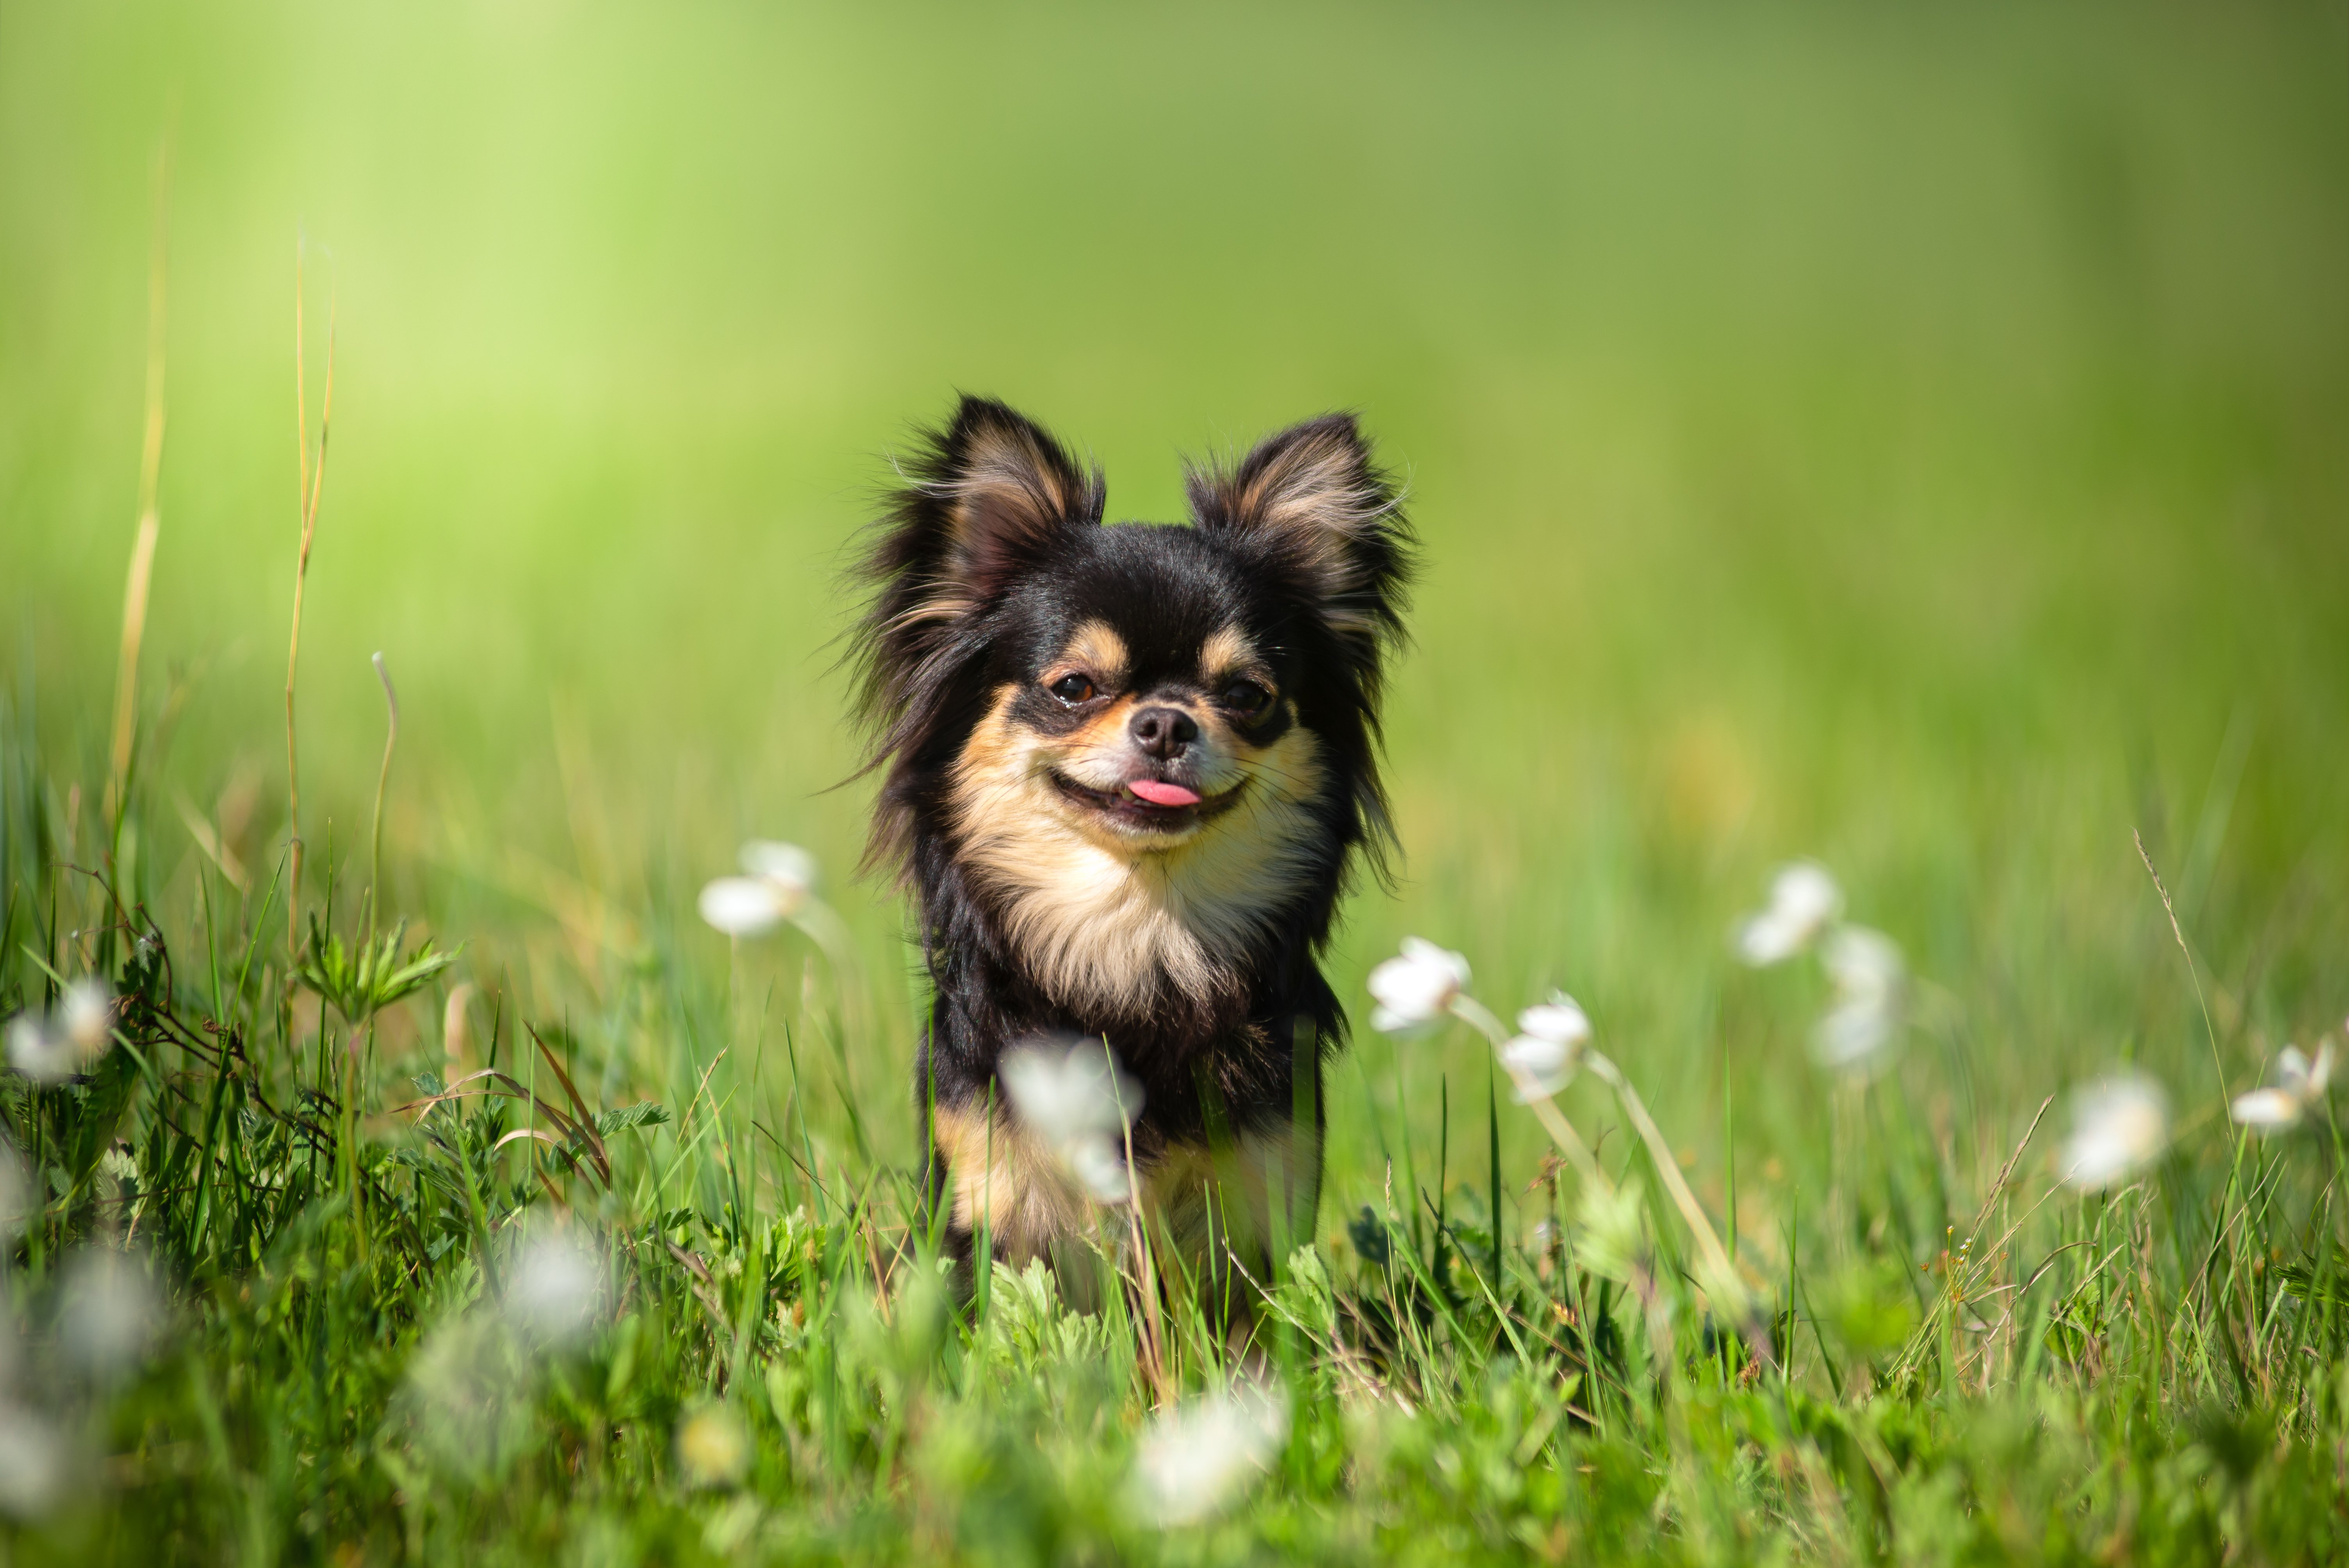 A Chihuahua dog on a sunny hot day | Photo: Shutterstock